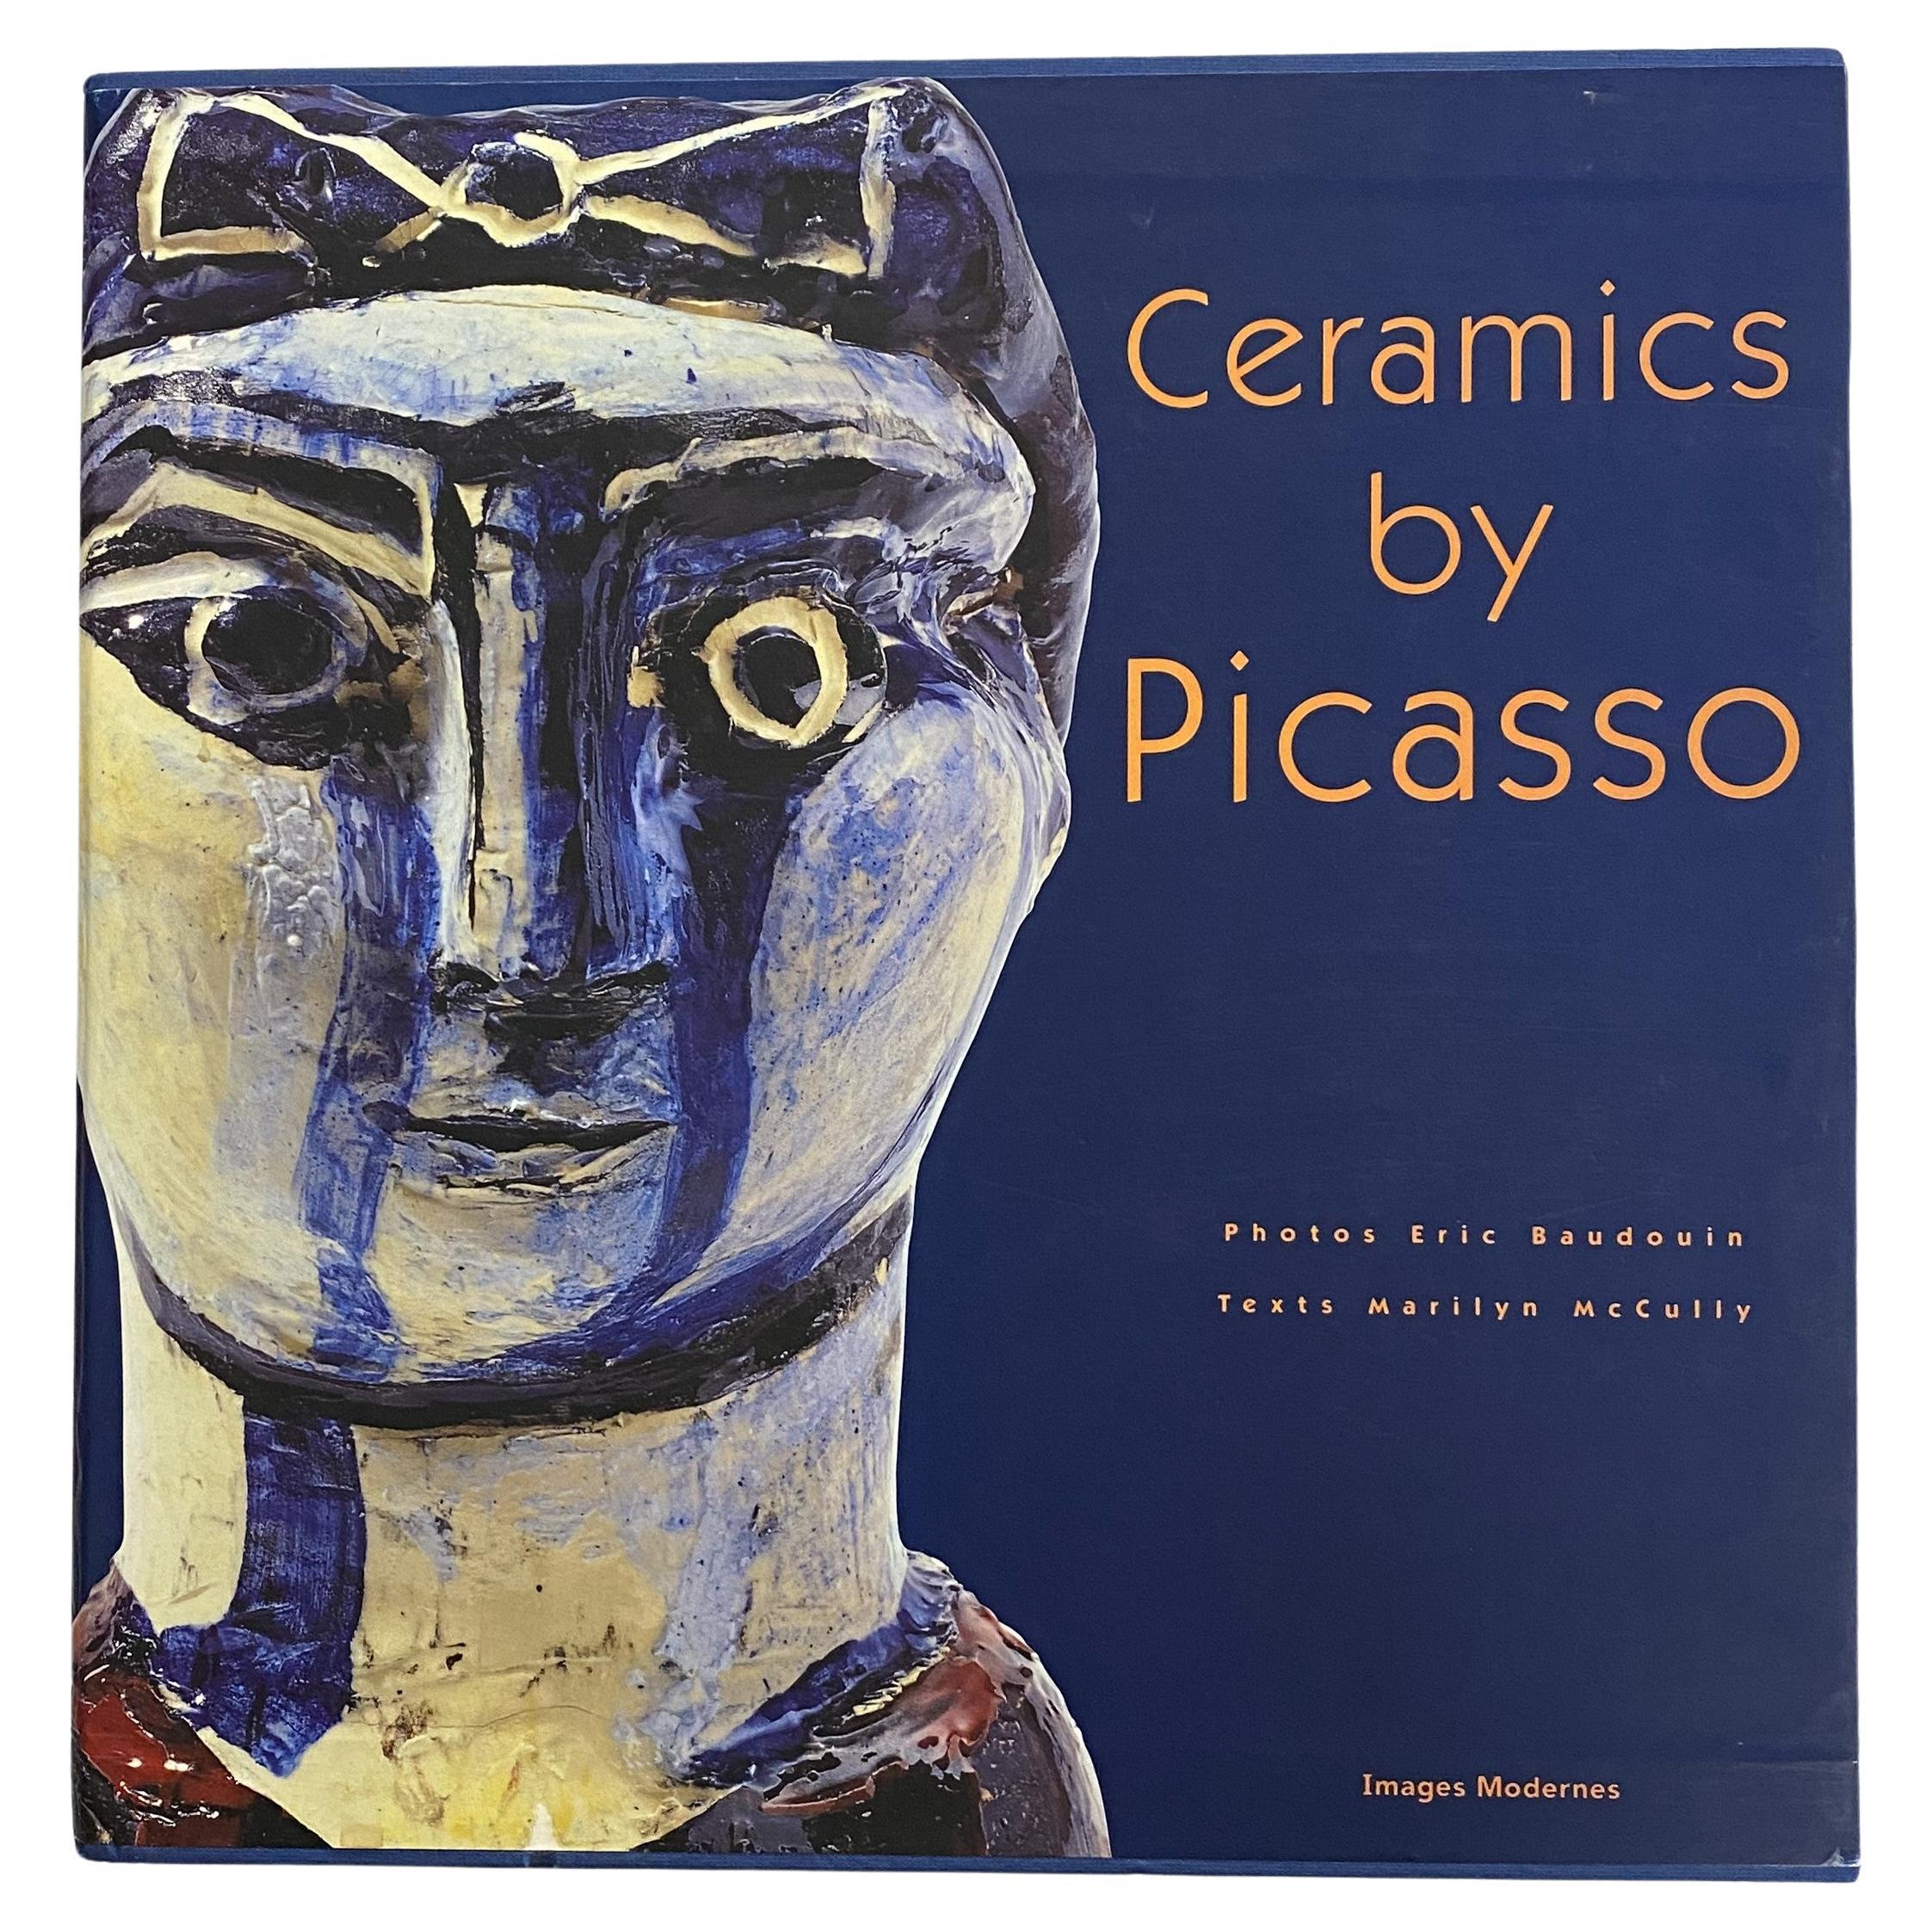 Ceramics by Picasso by Marilyn McCully (Book)